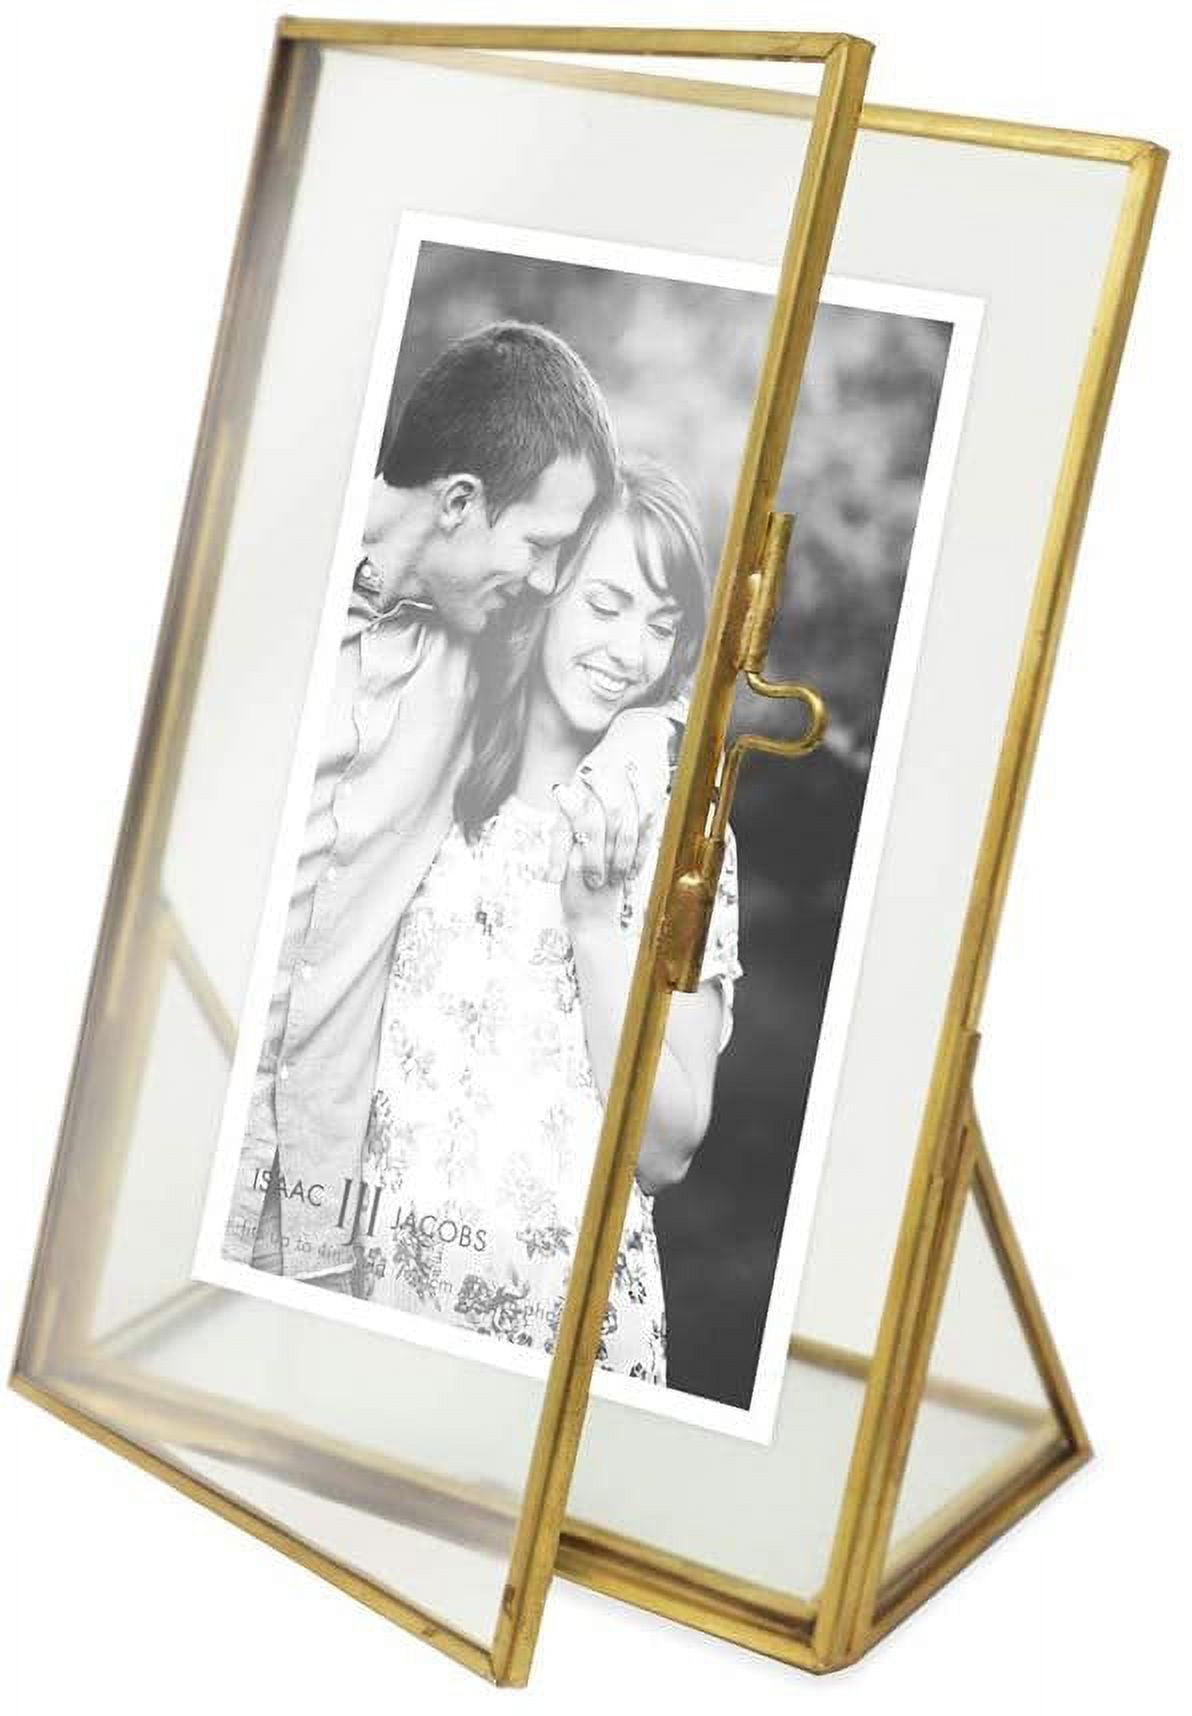 Isaac Jacobs 6x4, Antique Gold, Vintage Style Brass & Glass, Floating Photo  Frame (Horizontal), Metal Locket Closure & Angled Base, for Pictures, Art